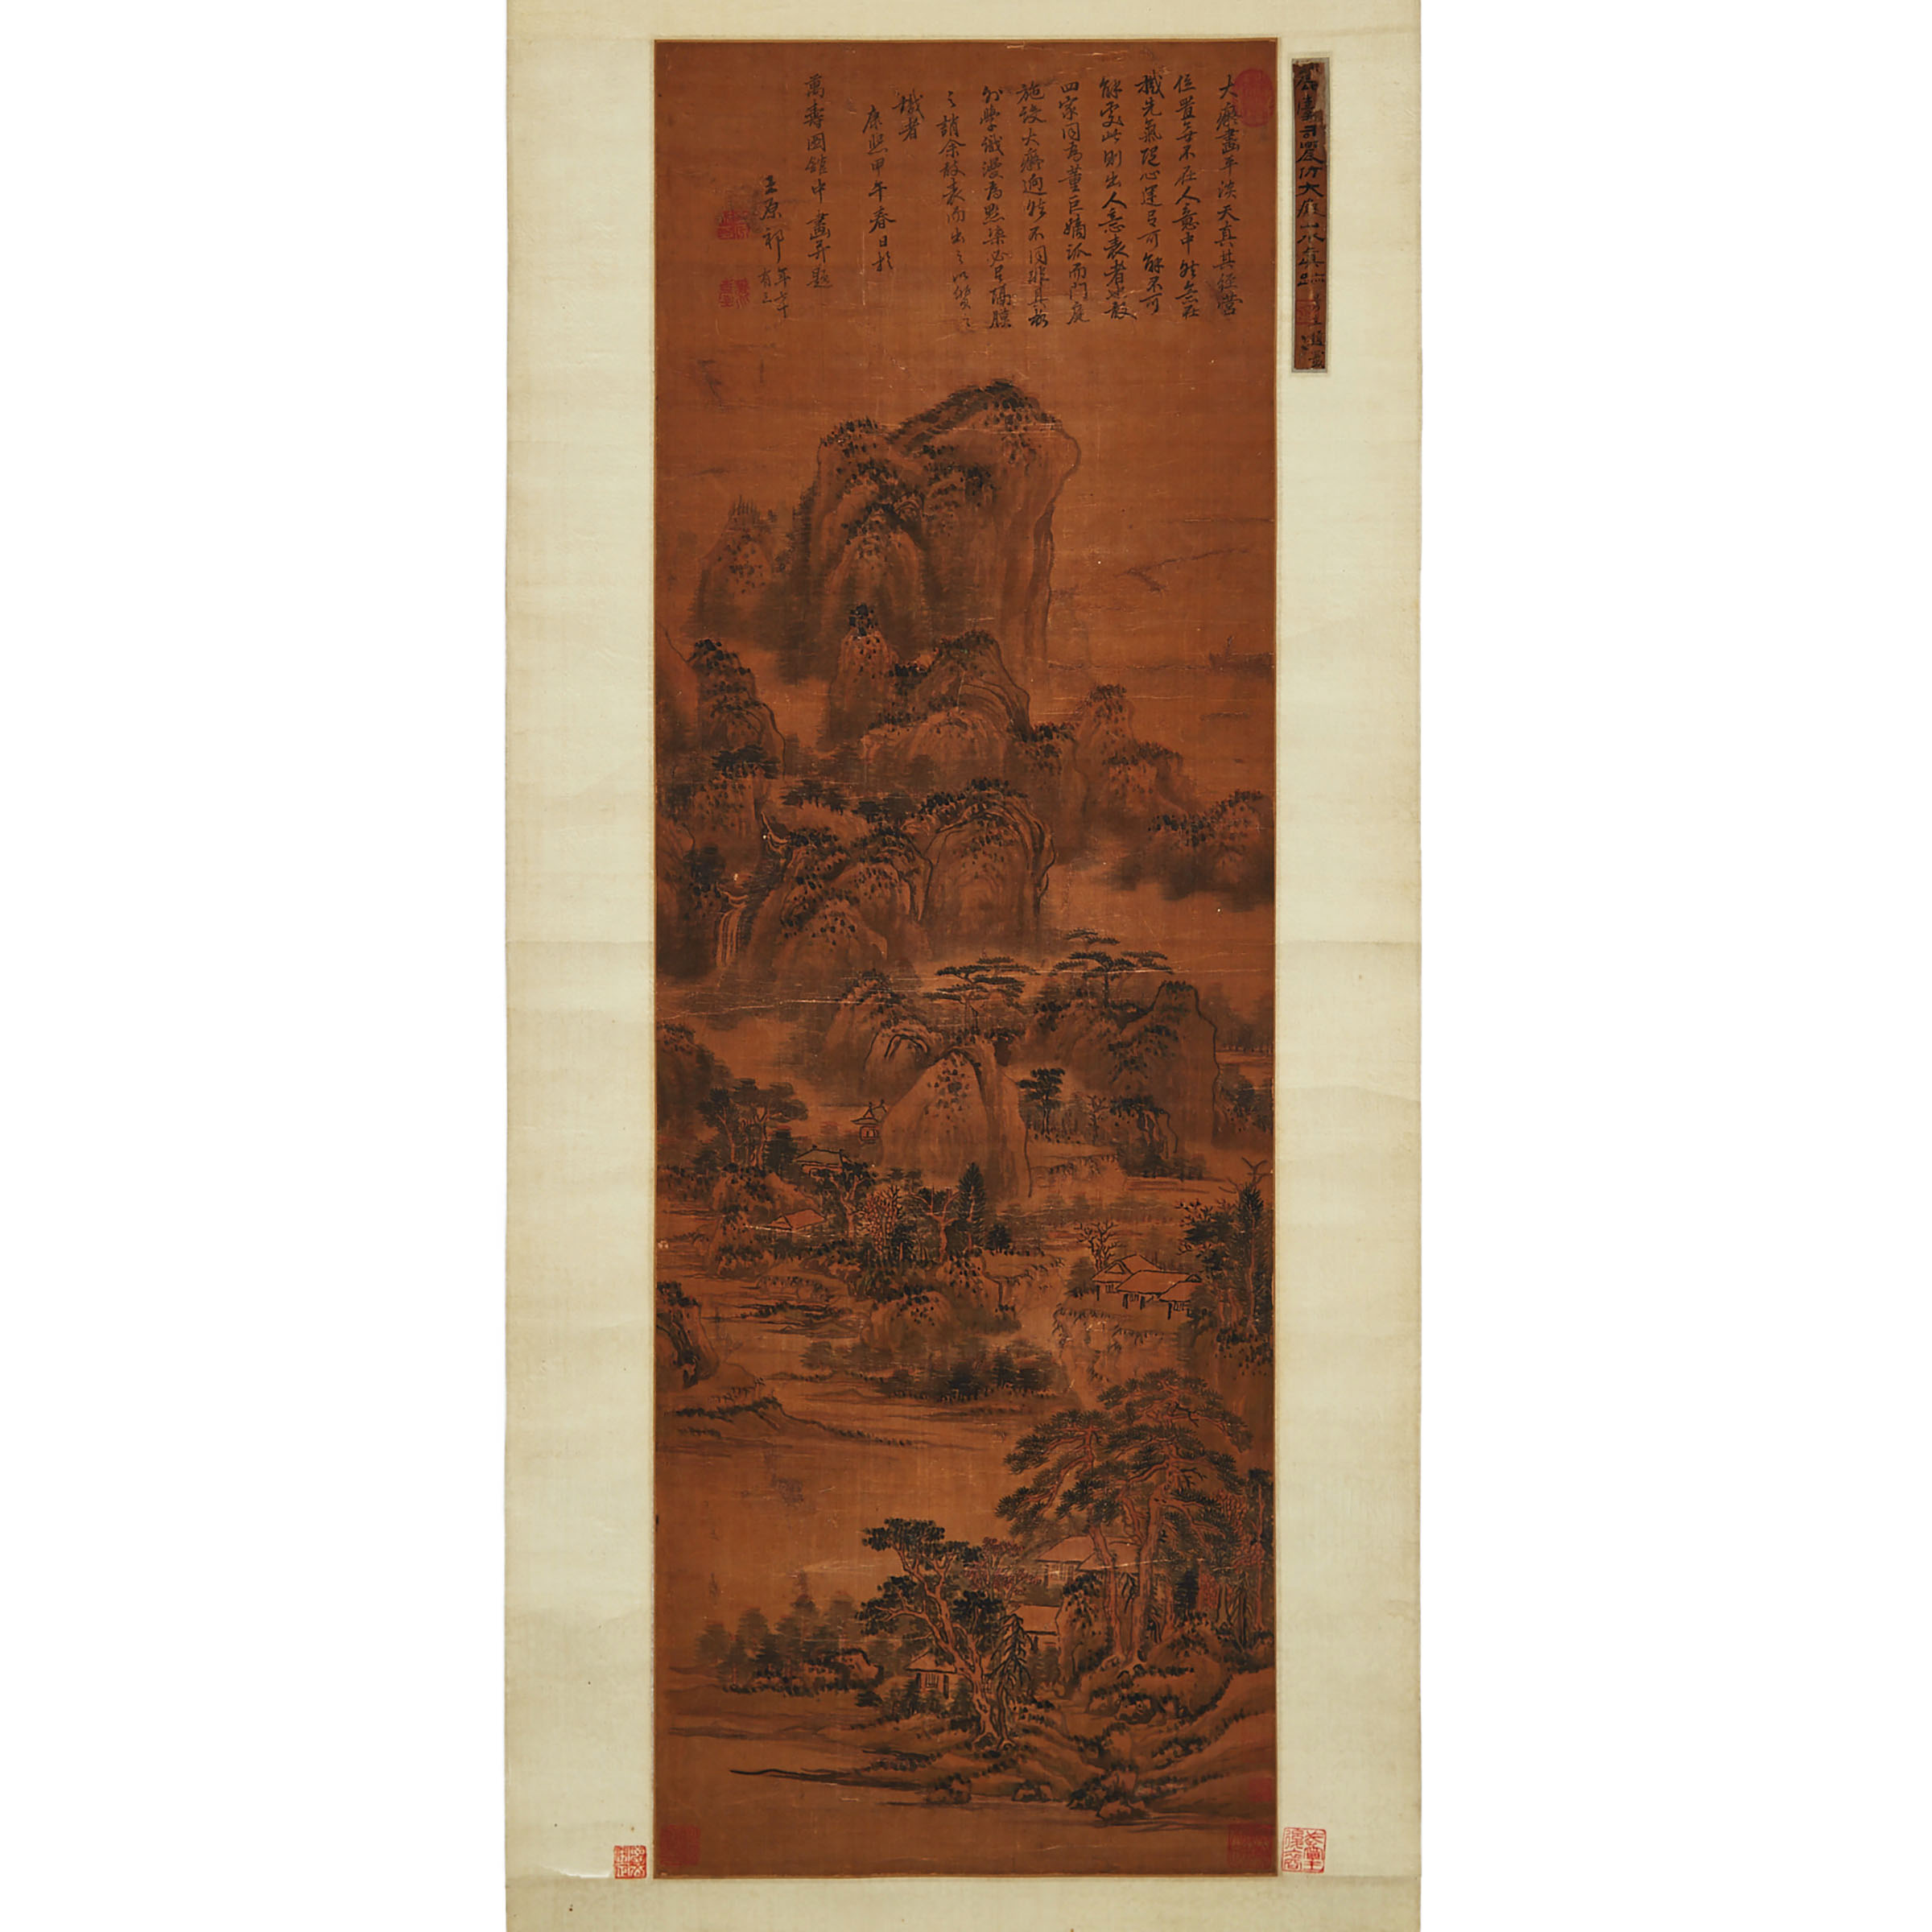 Attributed to Wang Yuanqi（1642～1715), Landscape, Scroll